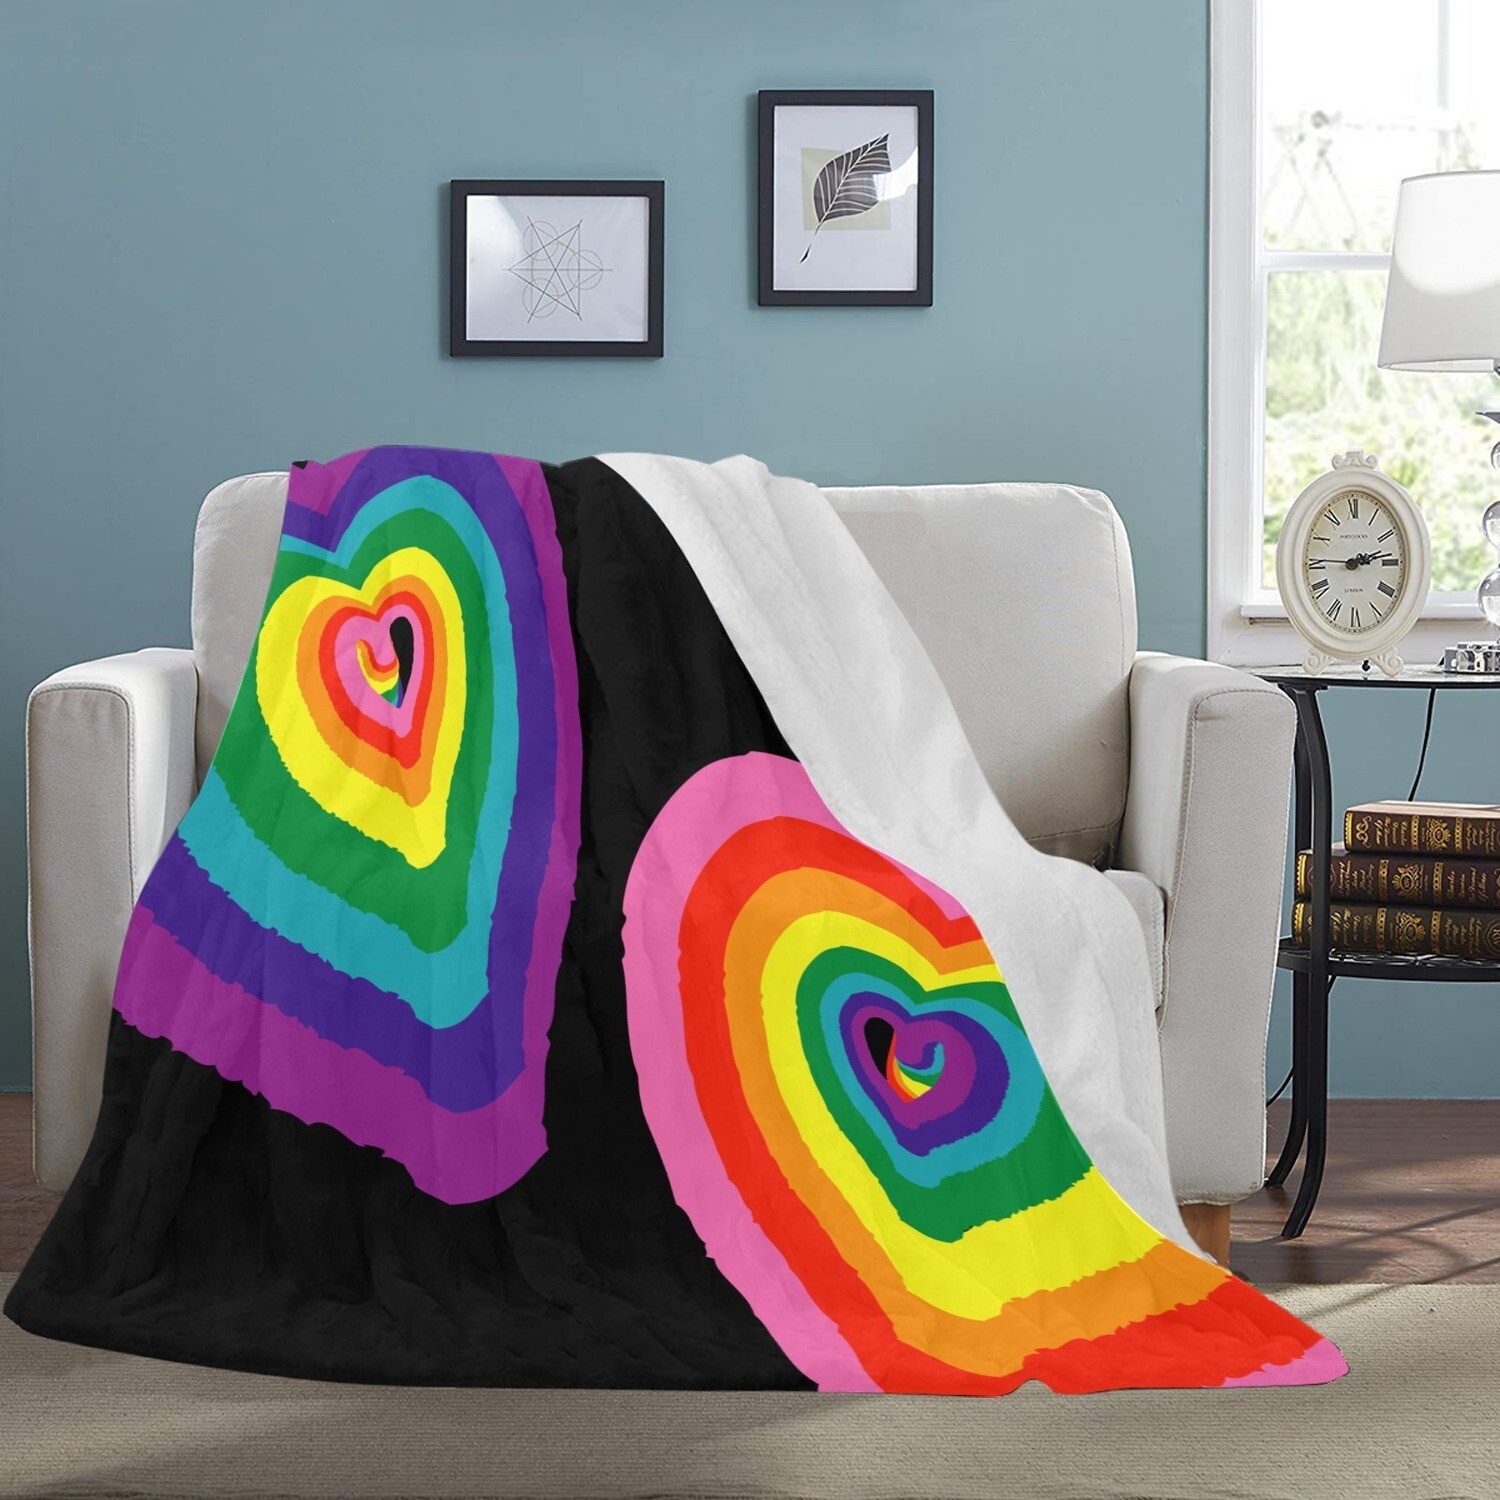 🤴🏽👸🏽🏳️‍🌈💕Large Ultra-Soft Micro Fleece Blanket Love is Love LGBTQ flag, big Graffiti hearts, rainbow flag, pride flag, gift, gift for her, gift for him, gift for them, 70"x80", black